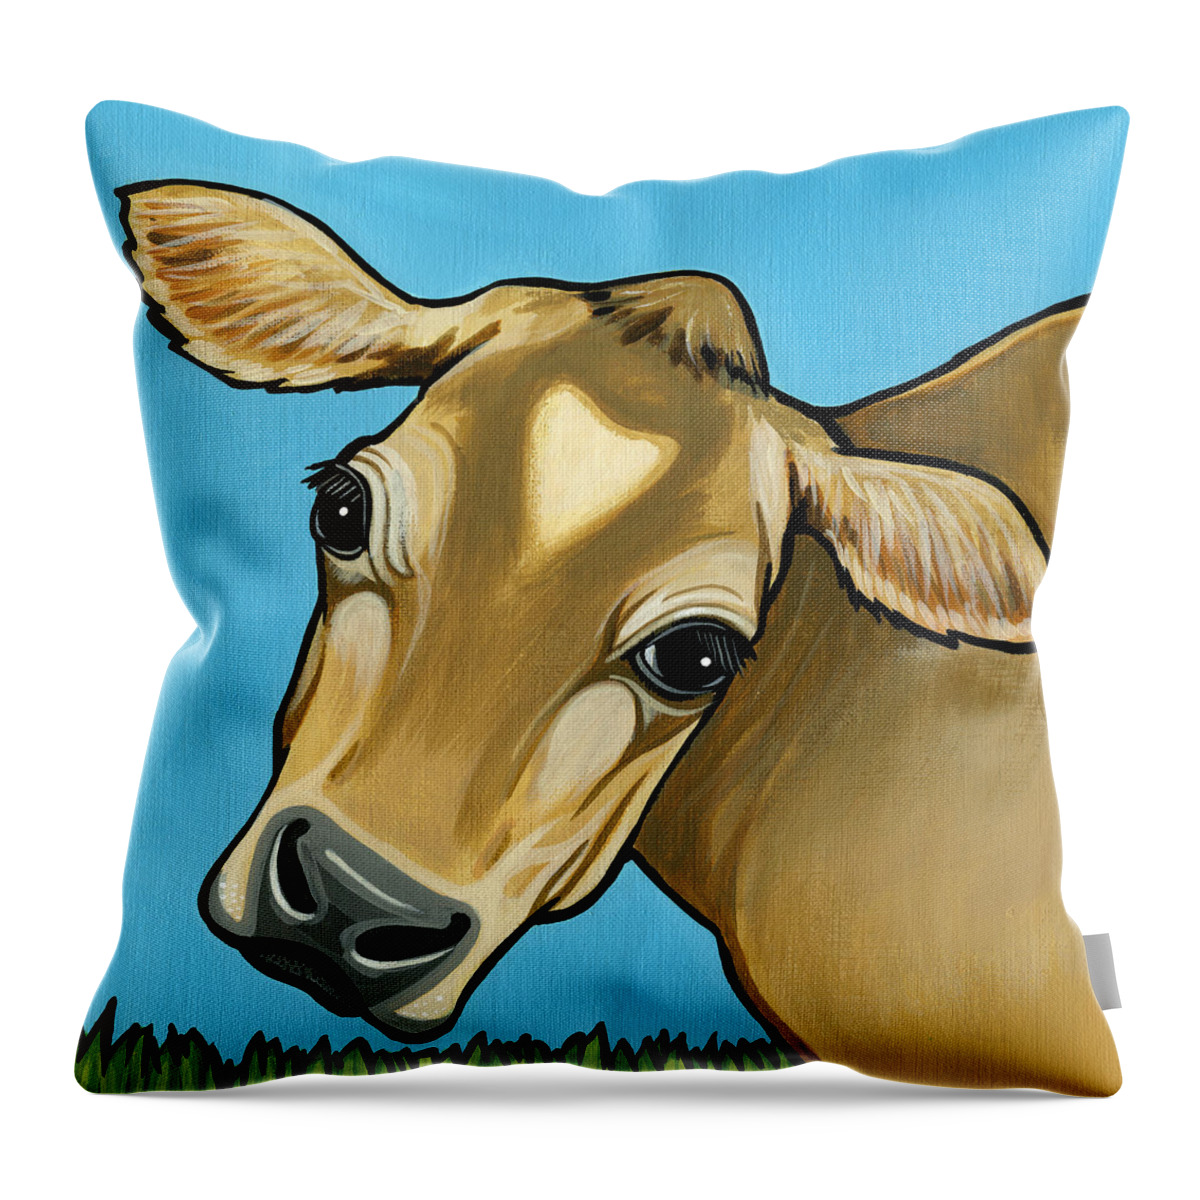 Jersey Cow Throw Pillow featuring the painting Jersey by Leanne Wilkes